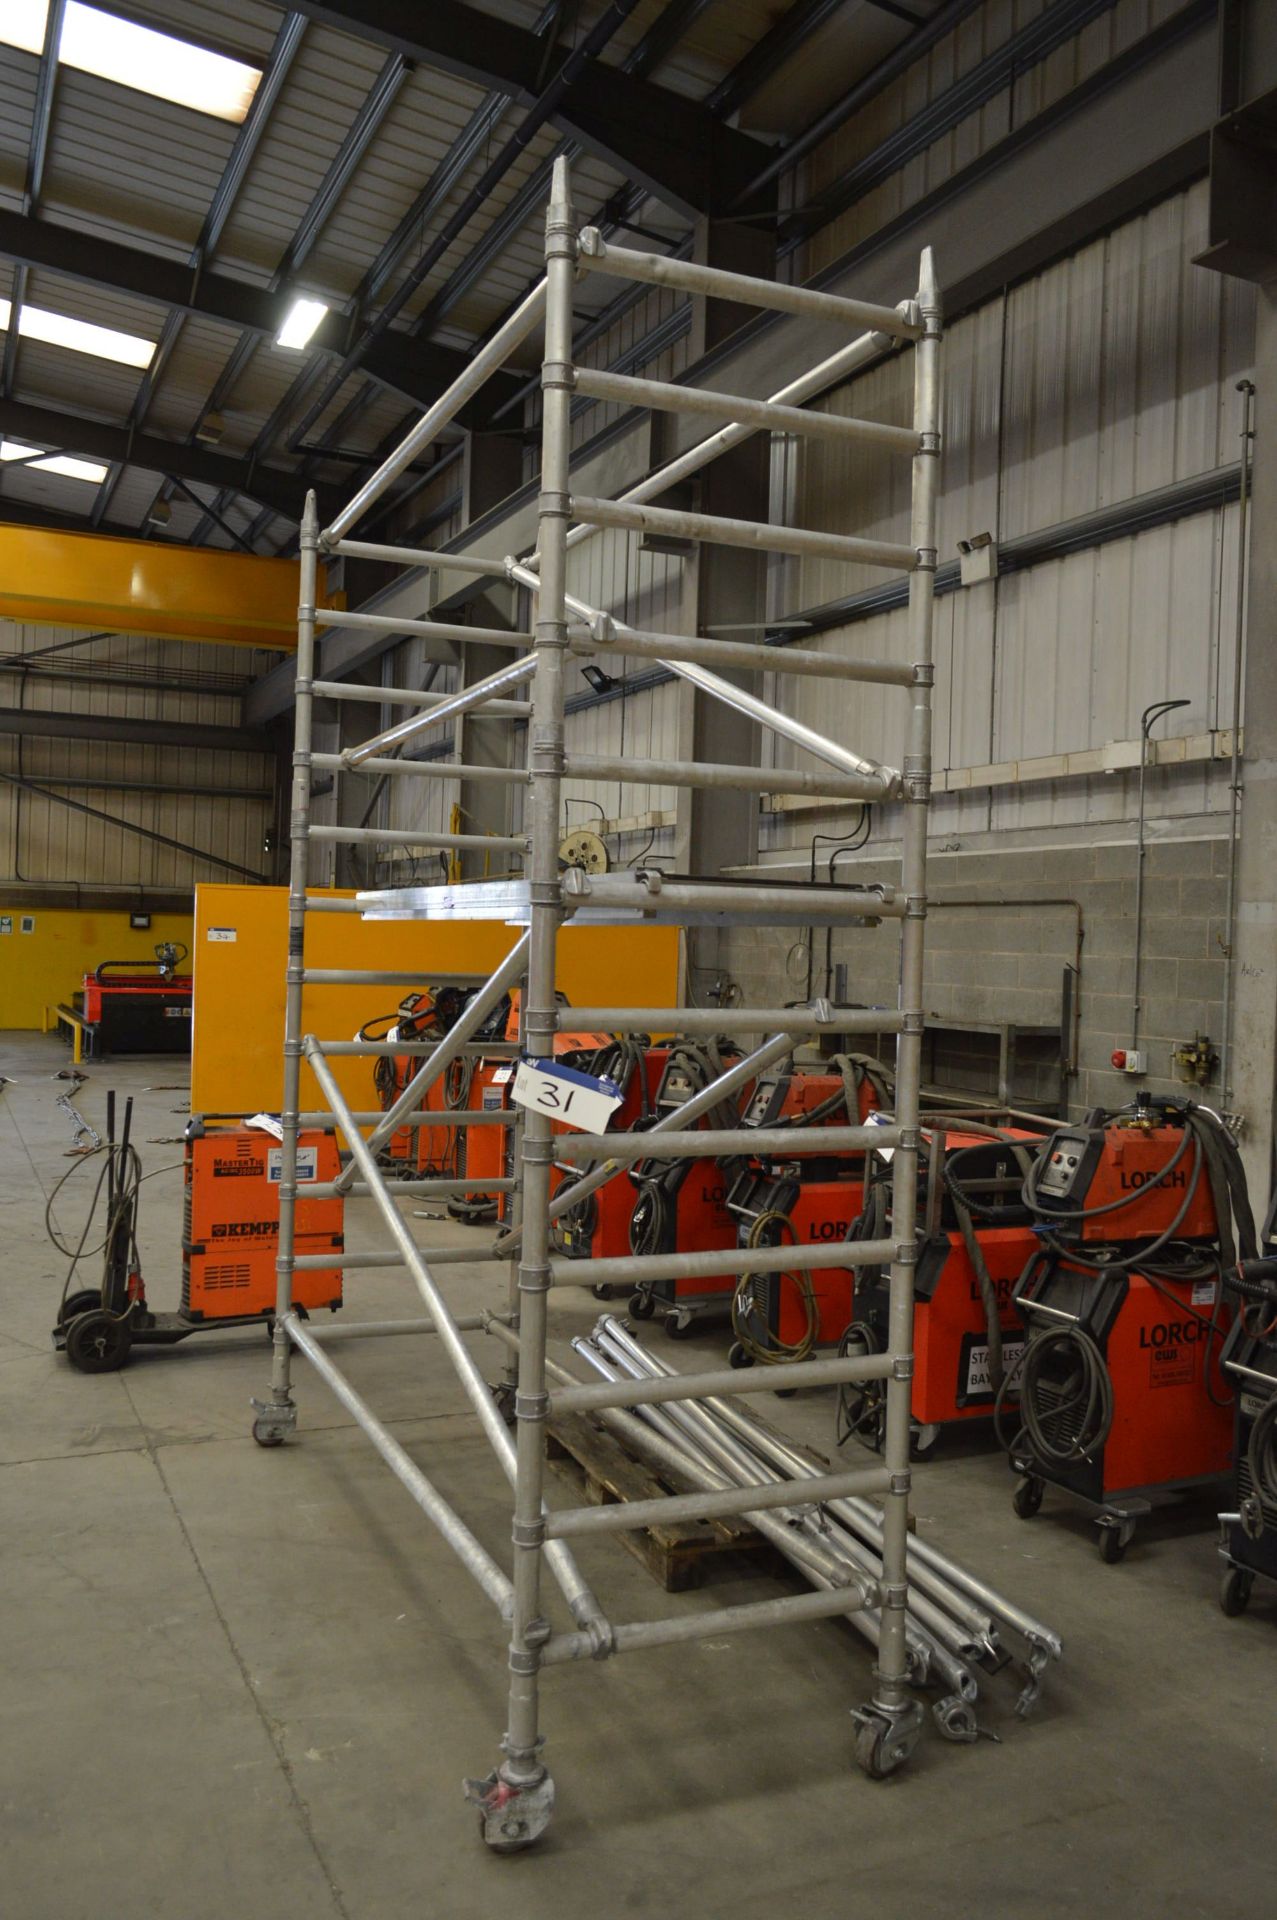 Alloy Scaffold Tower, with equipment on pallet